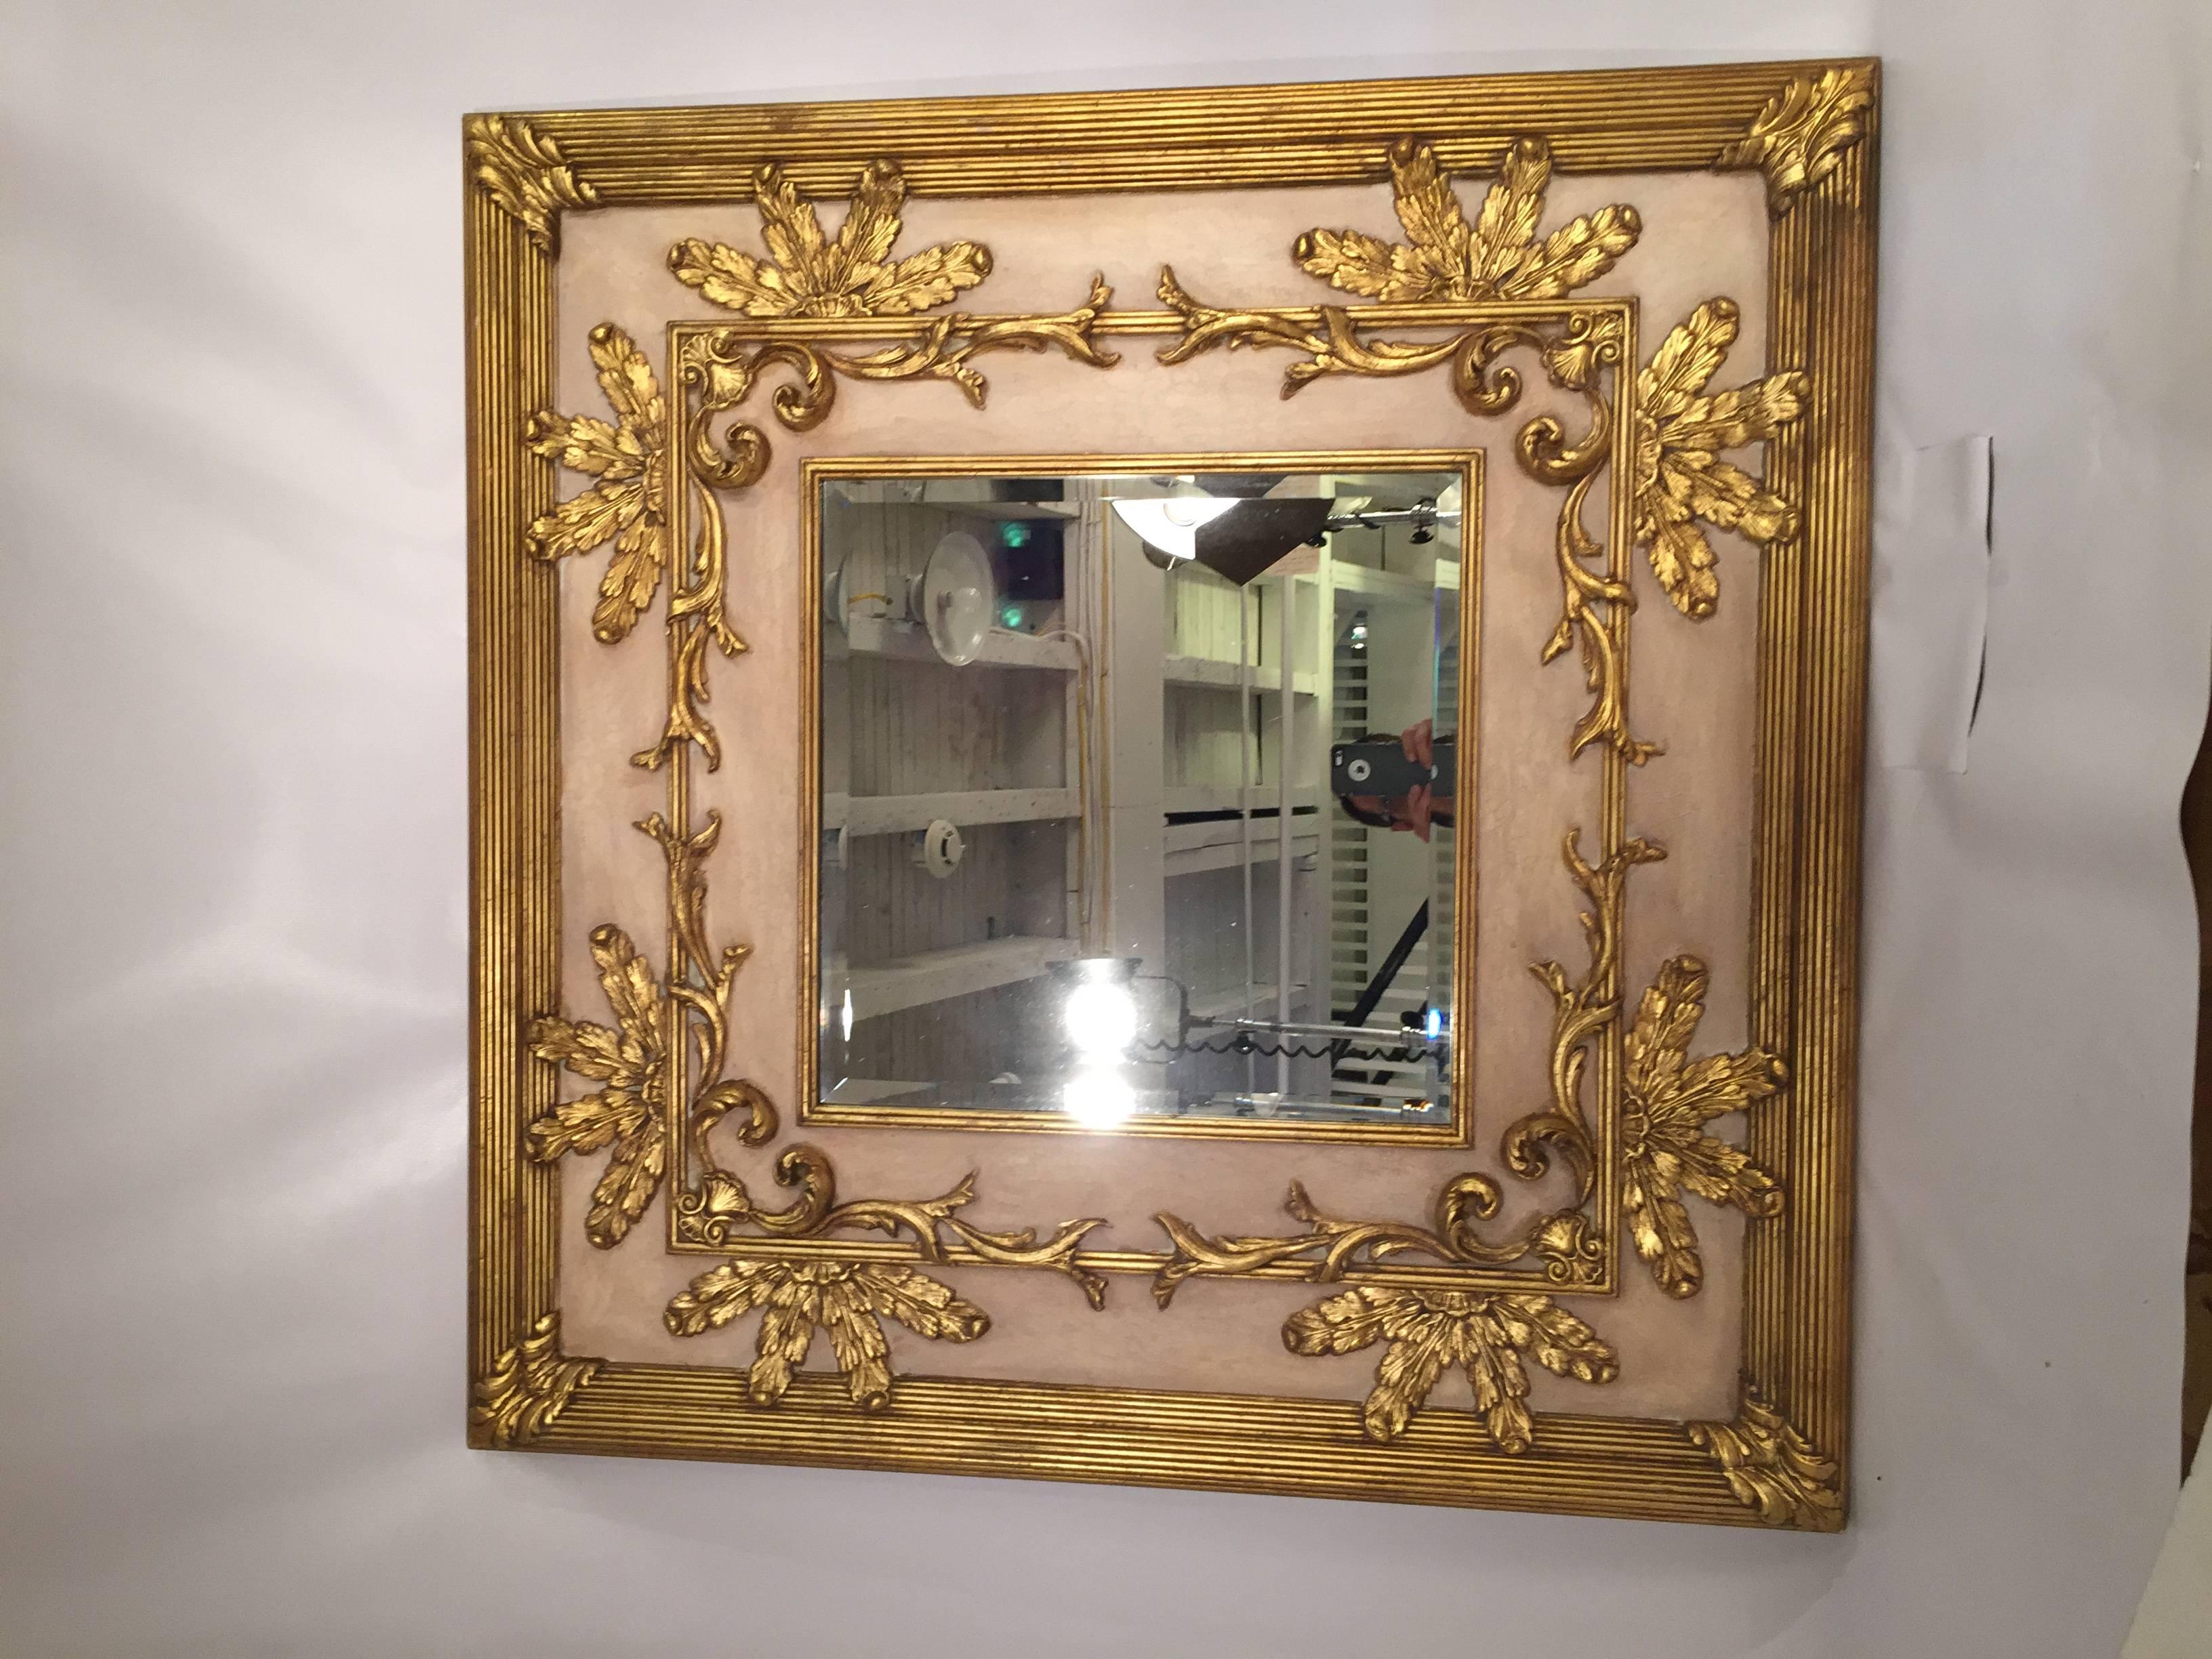 Opulent gilt and beveled glass mirror made by the premier mirror maker Friedman Brothers. Louis XV style with a flesh toned background accented by gilt scrolls and acanthus leaves. The outer reeded frame surrounds a 12.5